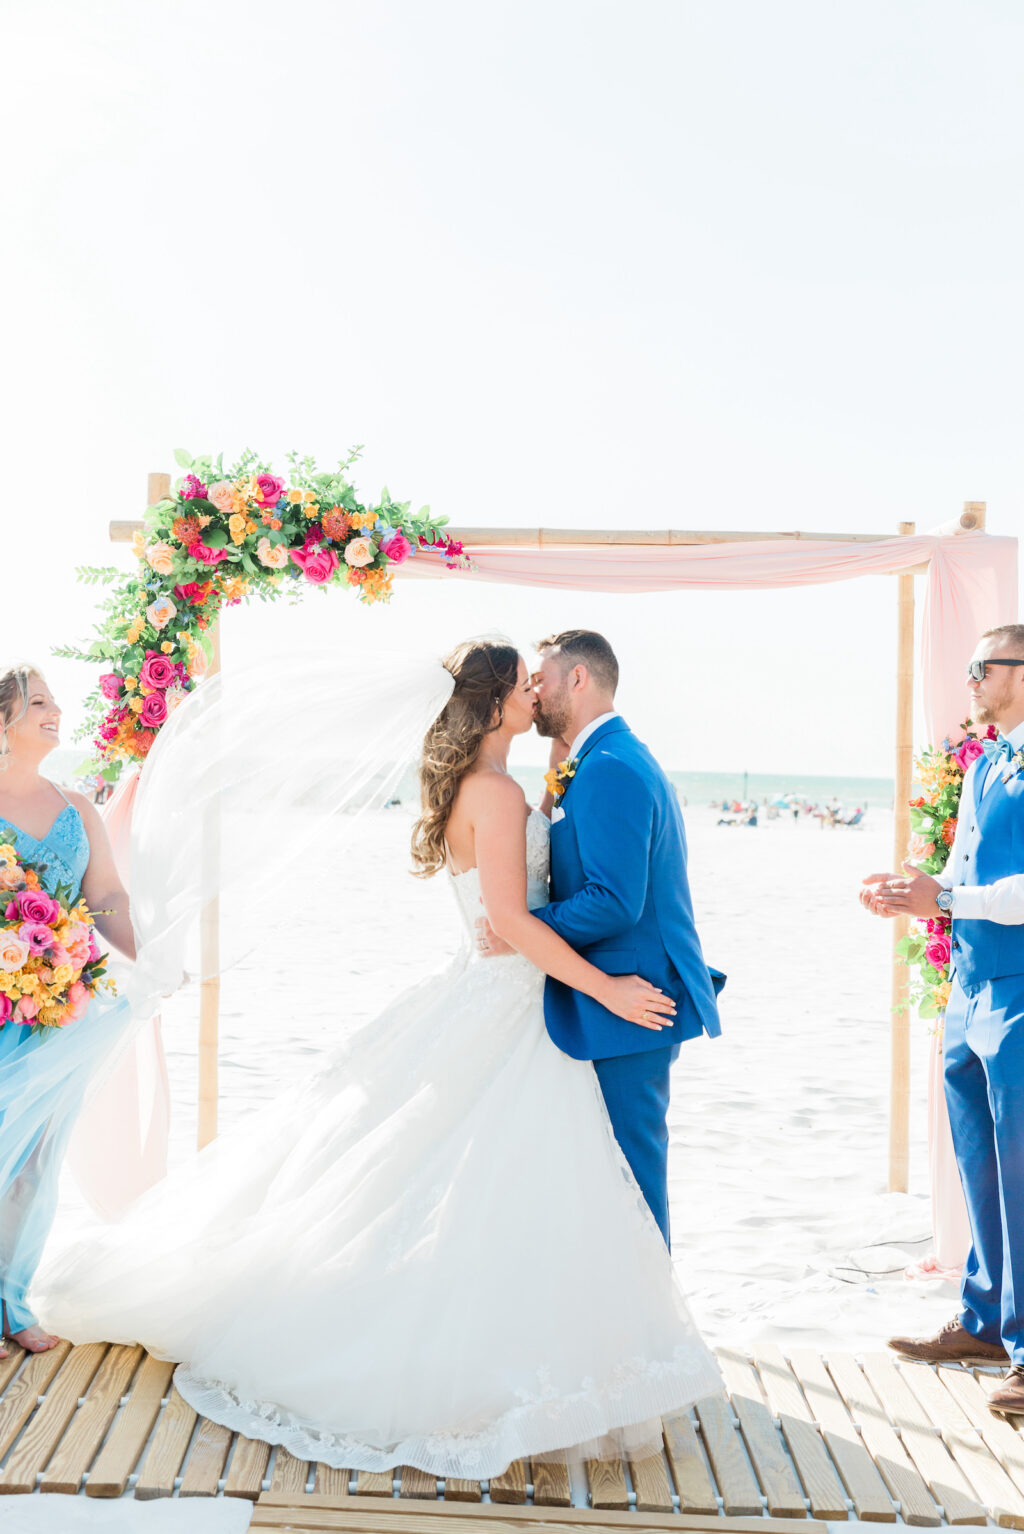 Bride and Groom First Kiss Portrait | Outdoor Beach Wedding Ceremony at Hilton Clearwater Beach